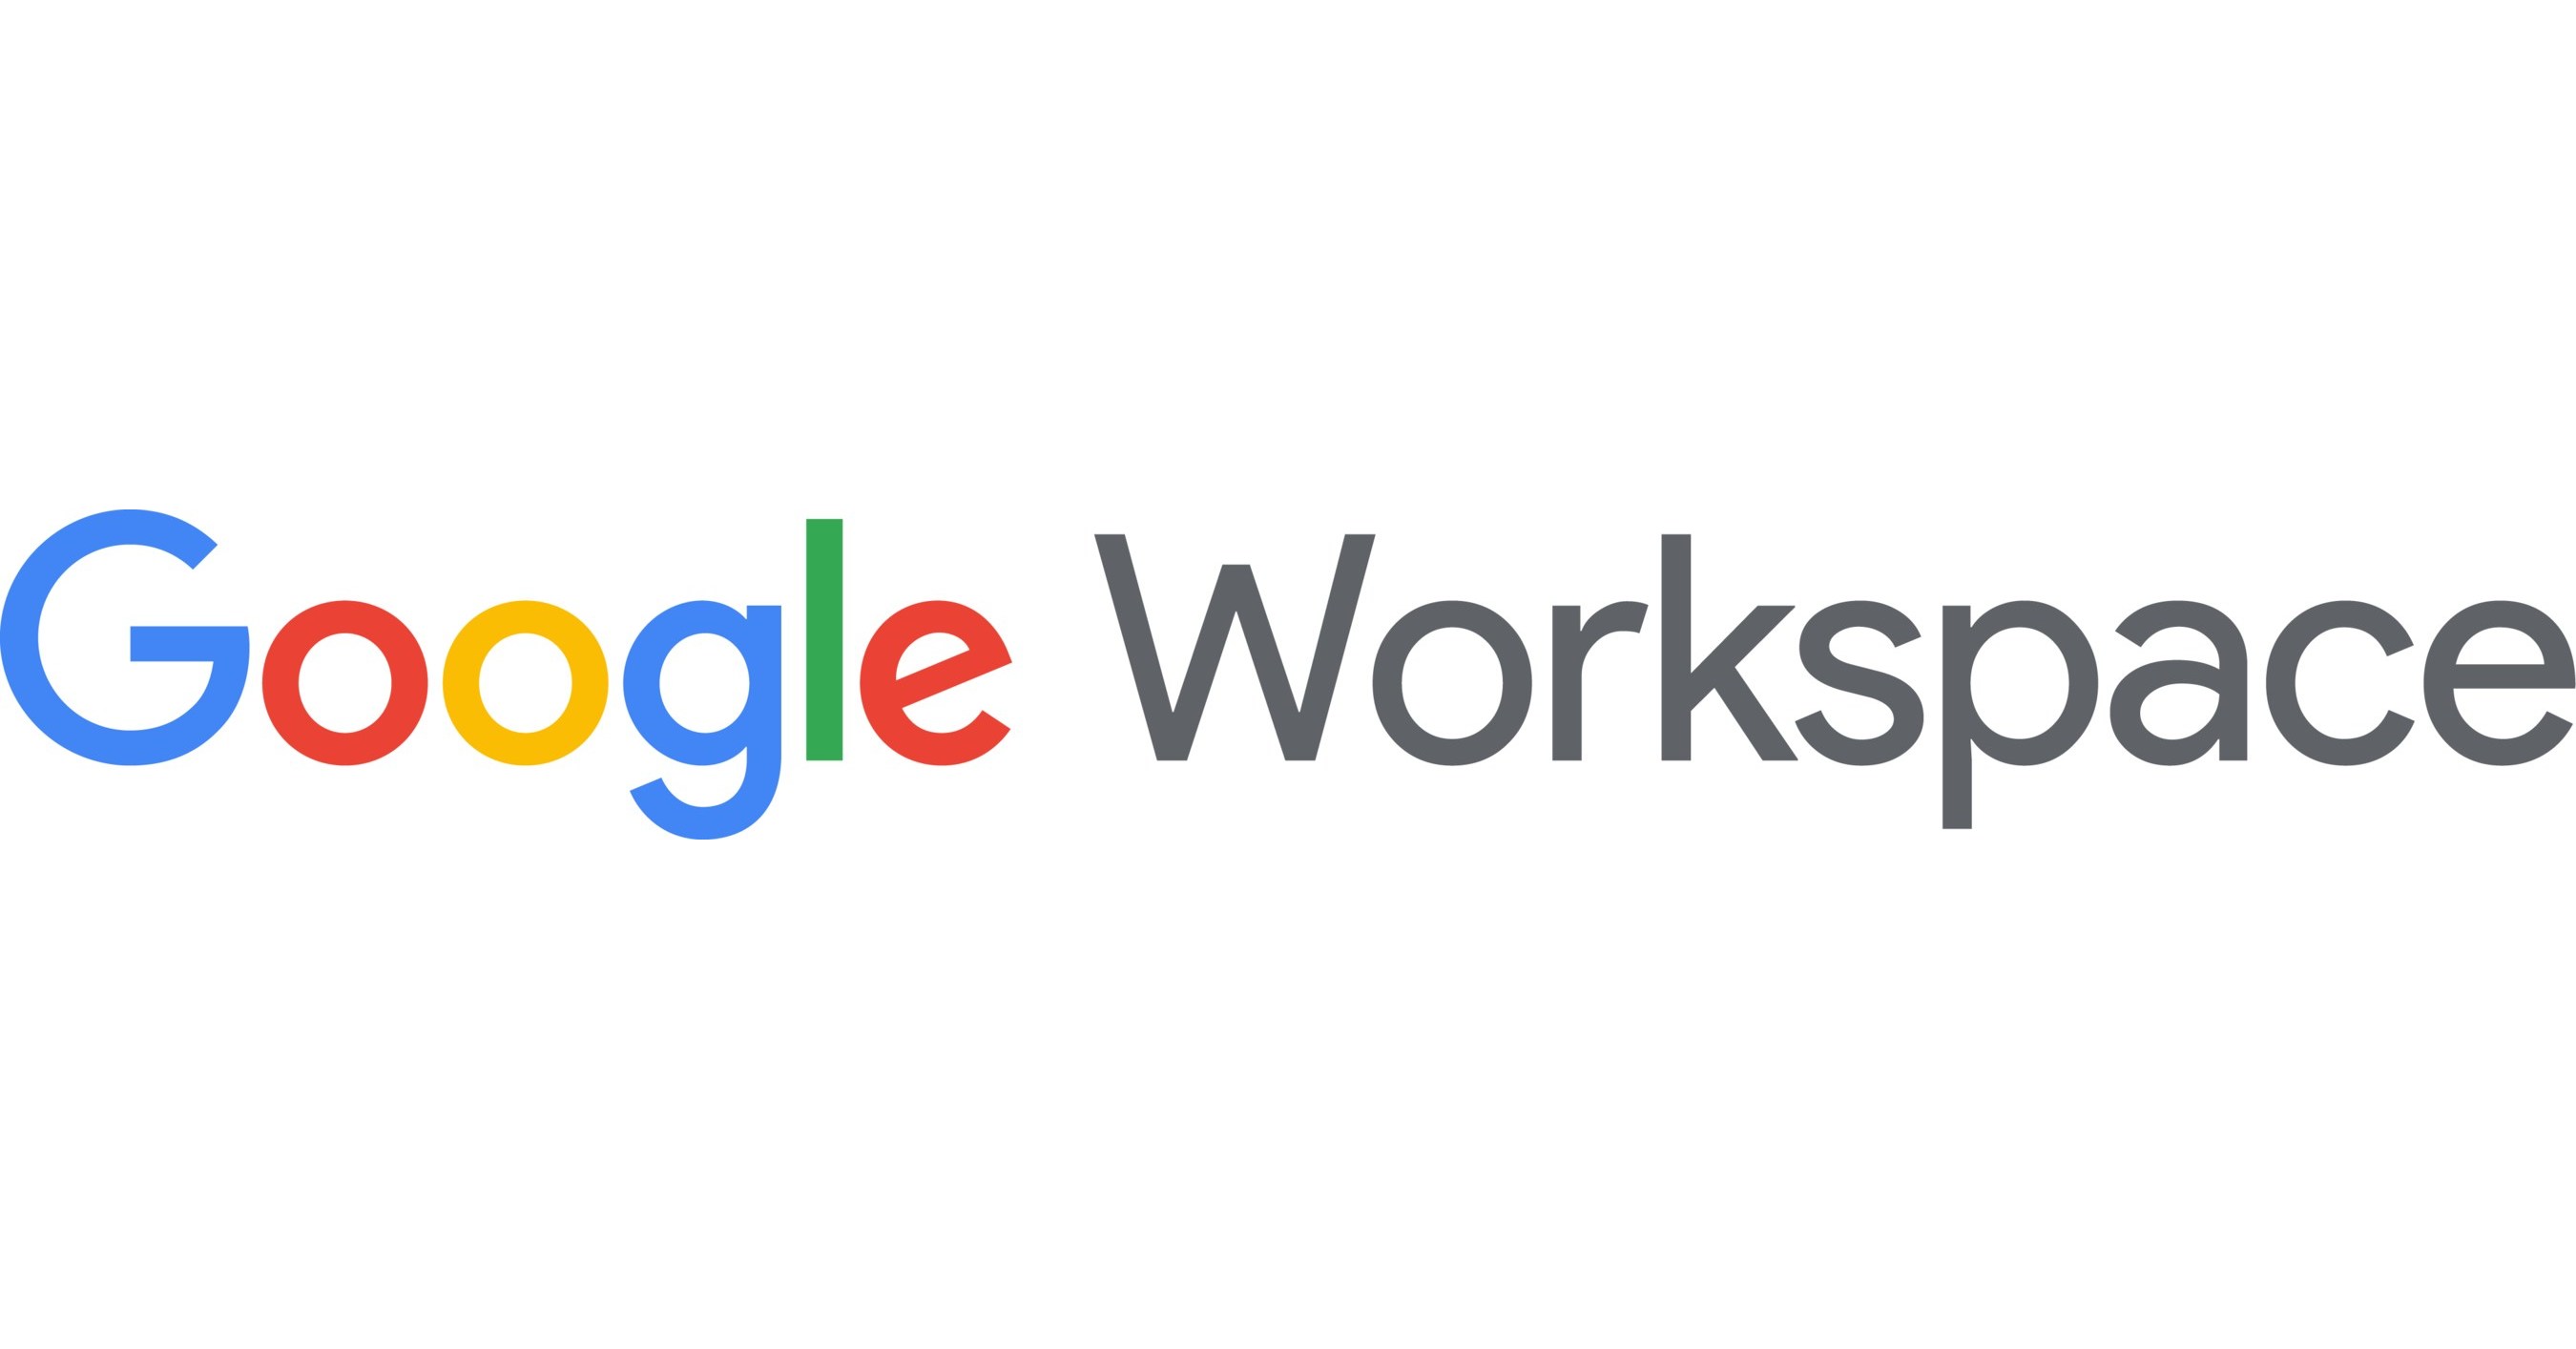 Google Cloud and the Central Dutch Government Sign Agreement for Workspace for the Public Sector